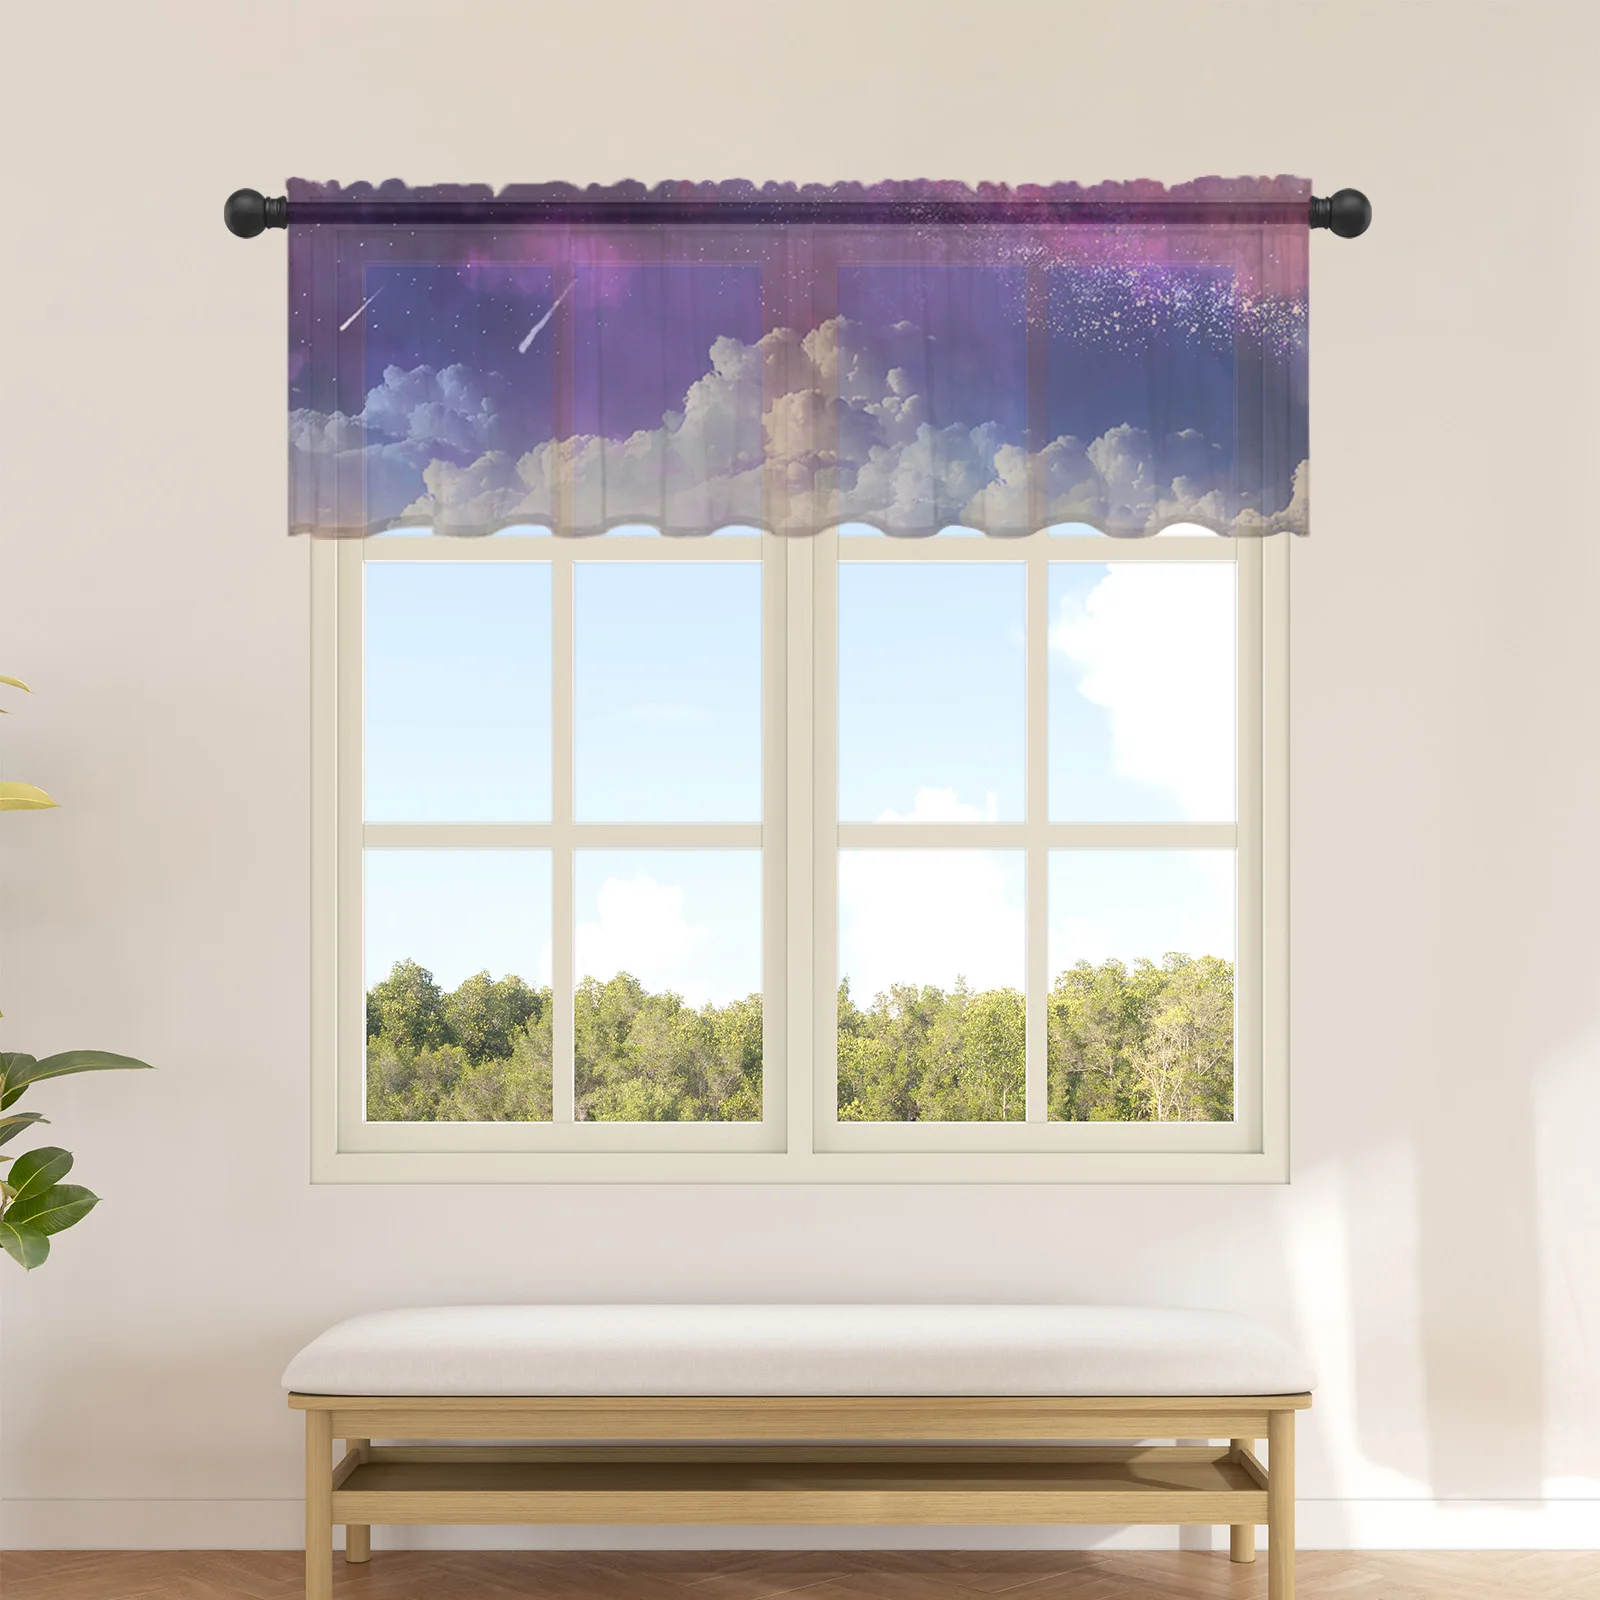 

Sky Clouds Night Sky Short Tulle Curtain Kitchen Small Curtain Sheer Curtain Living Room Home Decor Voile Drapes